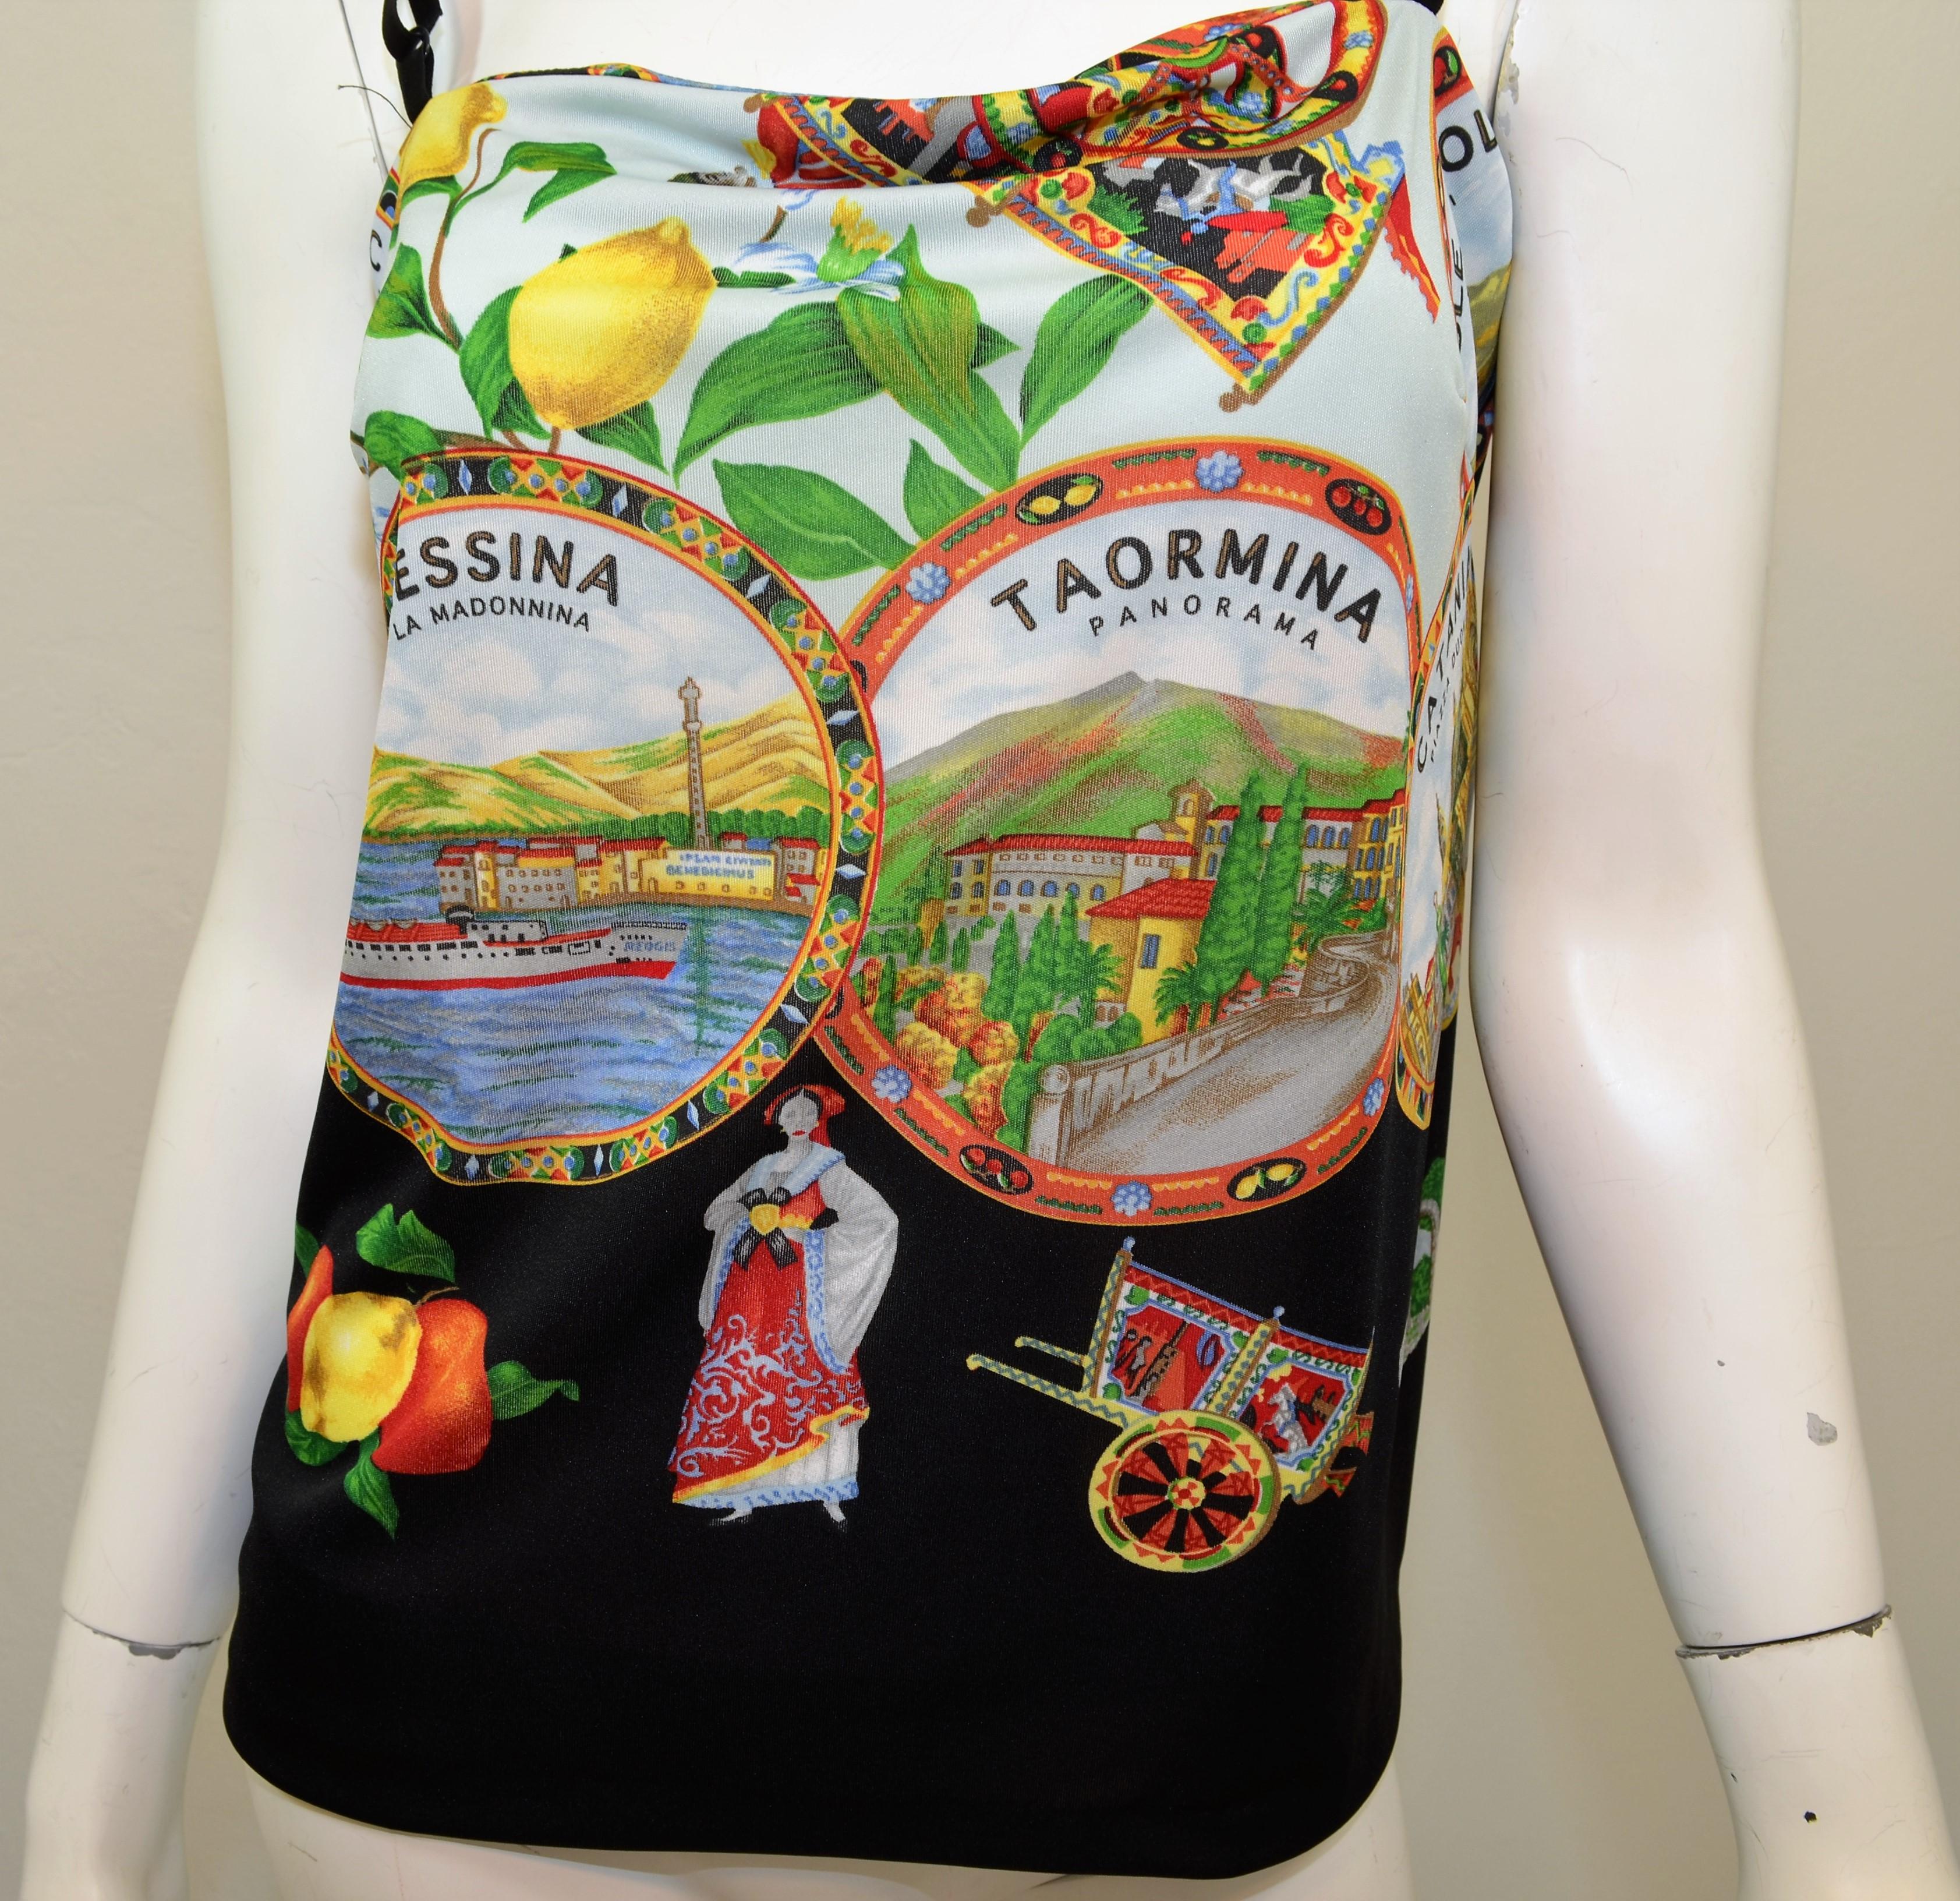 Dolce & Gabbana Mare “Isole Eolie” Printed Camisole Top -- features a cowl neckline and adjustable shoulder straps. Top is labeled size 46(XL), made in Italy, 100% polyester.

Measurements:
Bust 34”, length 12.5”